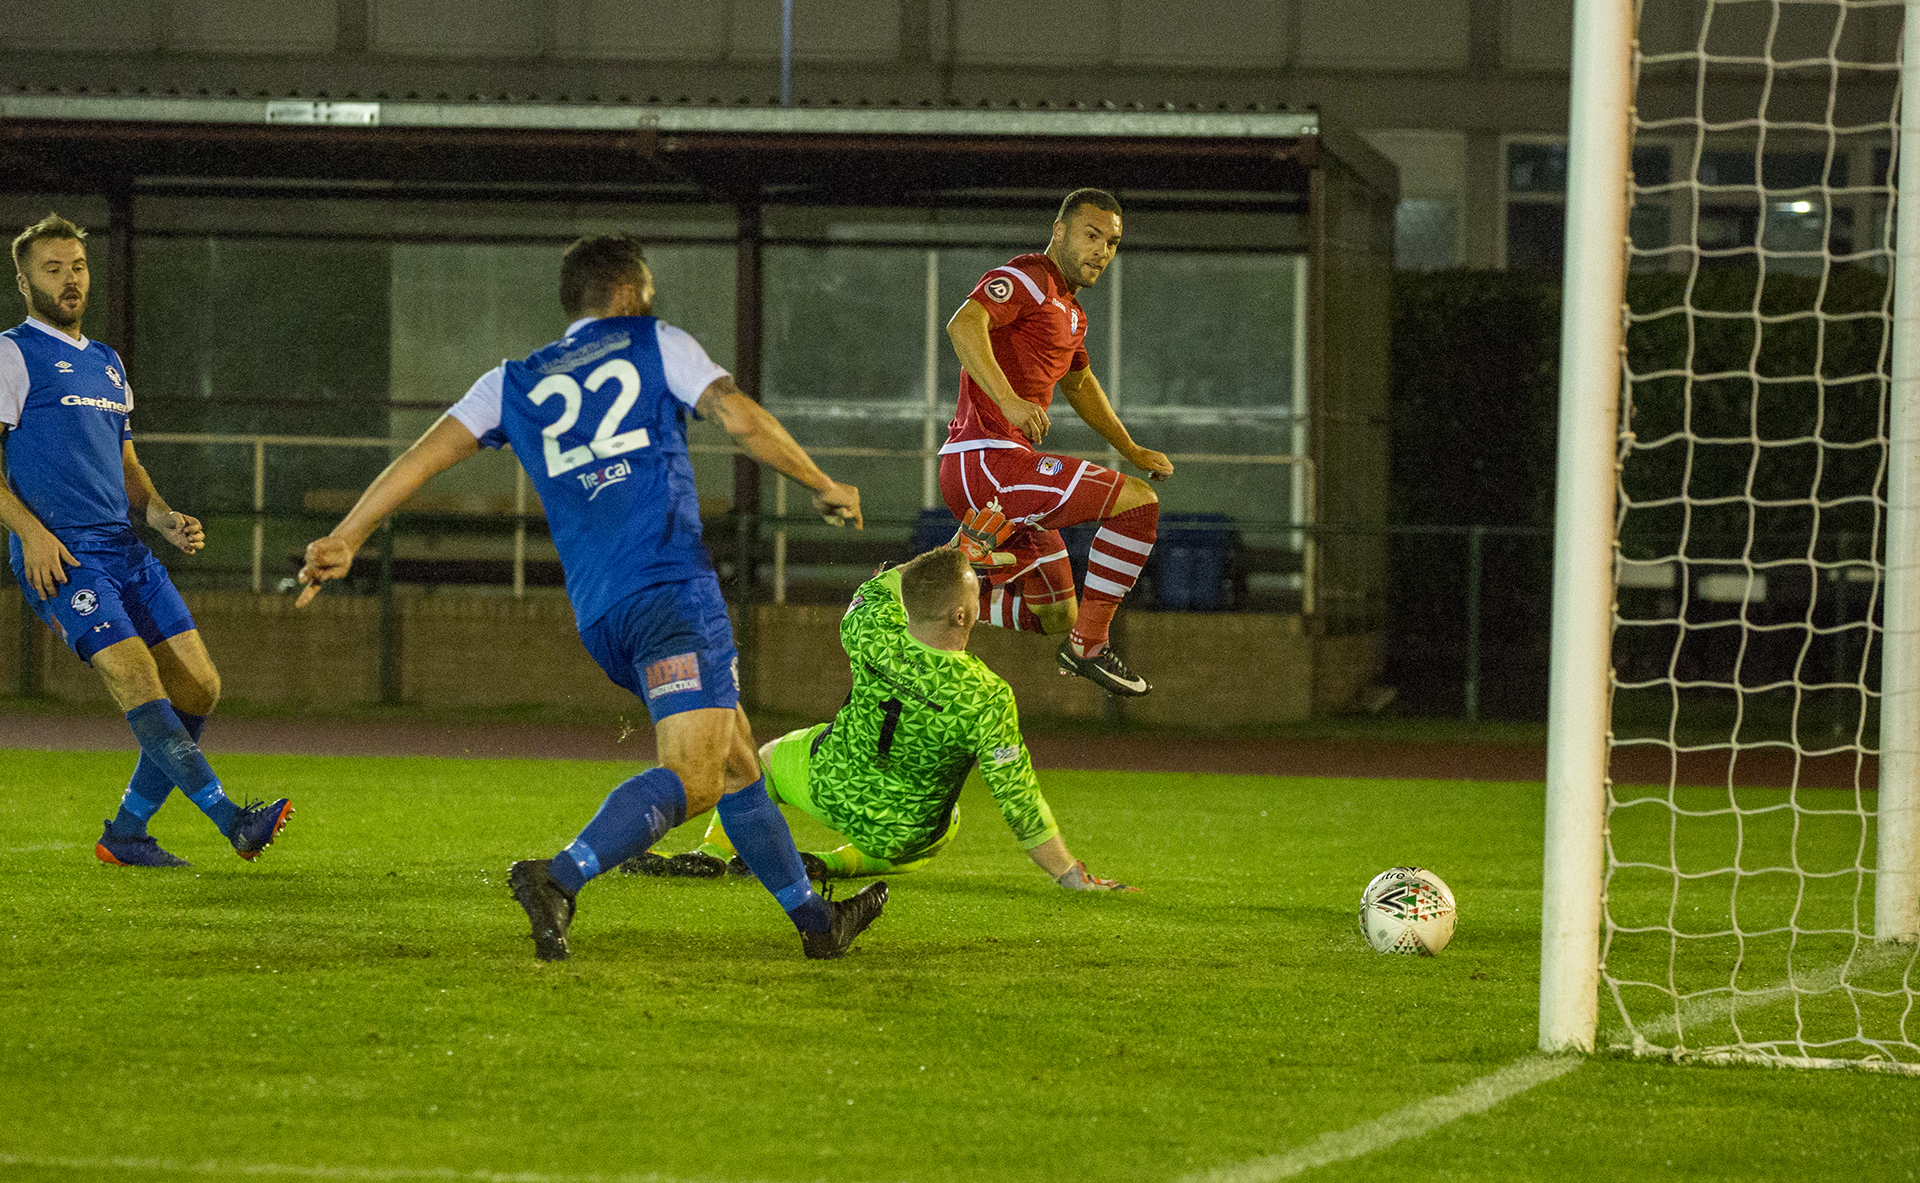 Ryan Wignall slots beyond Dave Roberts in the Airbus goal to make it 5-1 © NCM Media